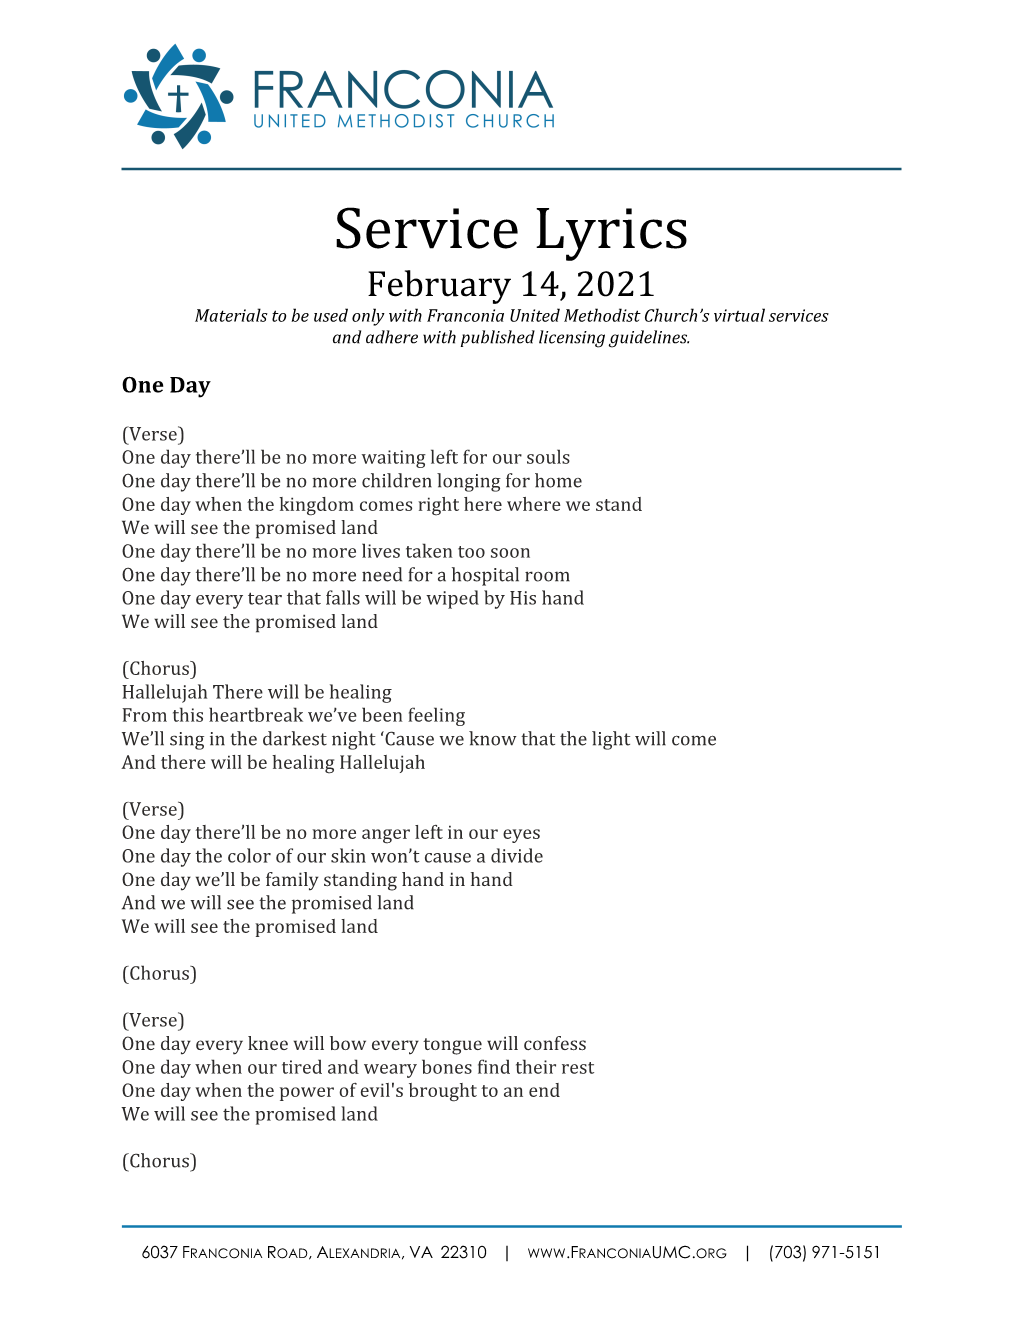 Service Lyrics February 14, 2021 Materials to Be Used Only with Franconia United Methodist Church’S Virtual Services and Adhere with Published Licensing Guidelines